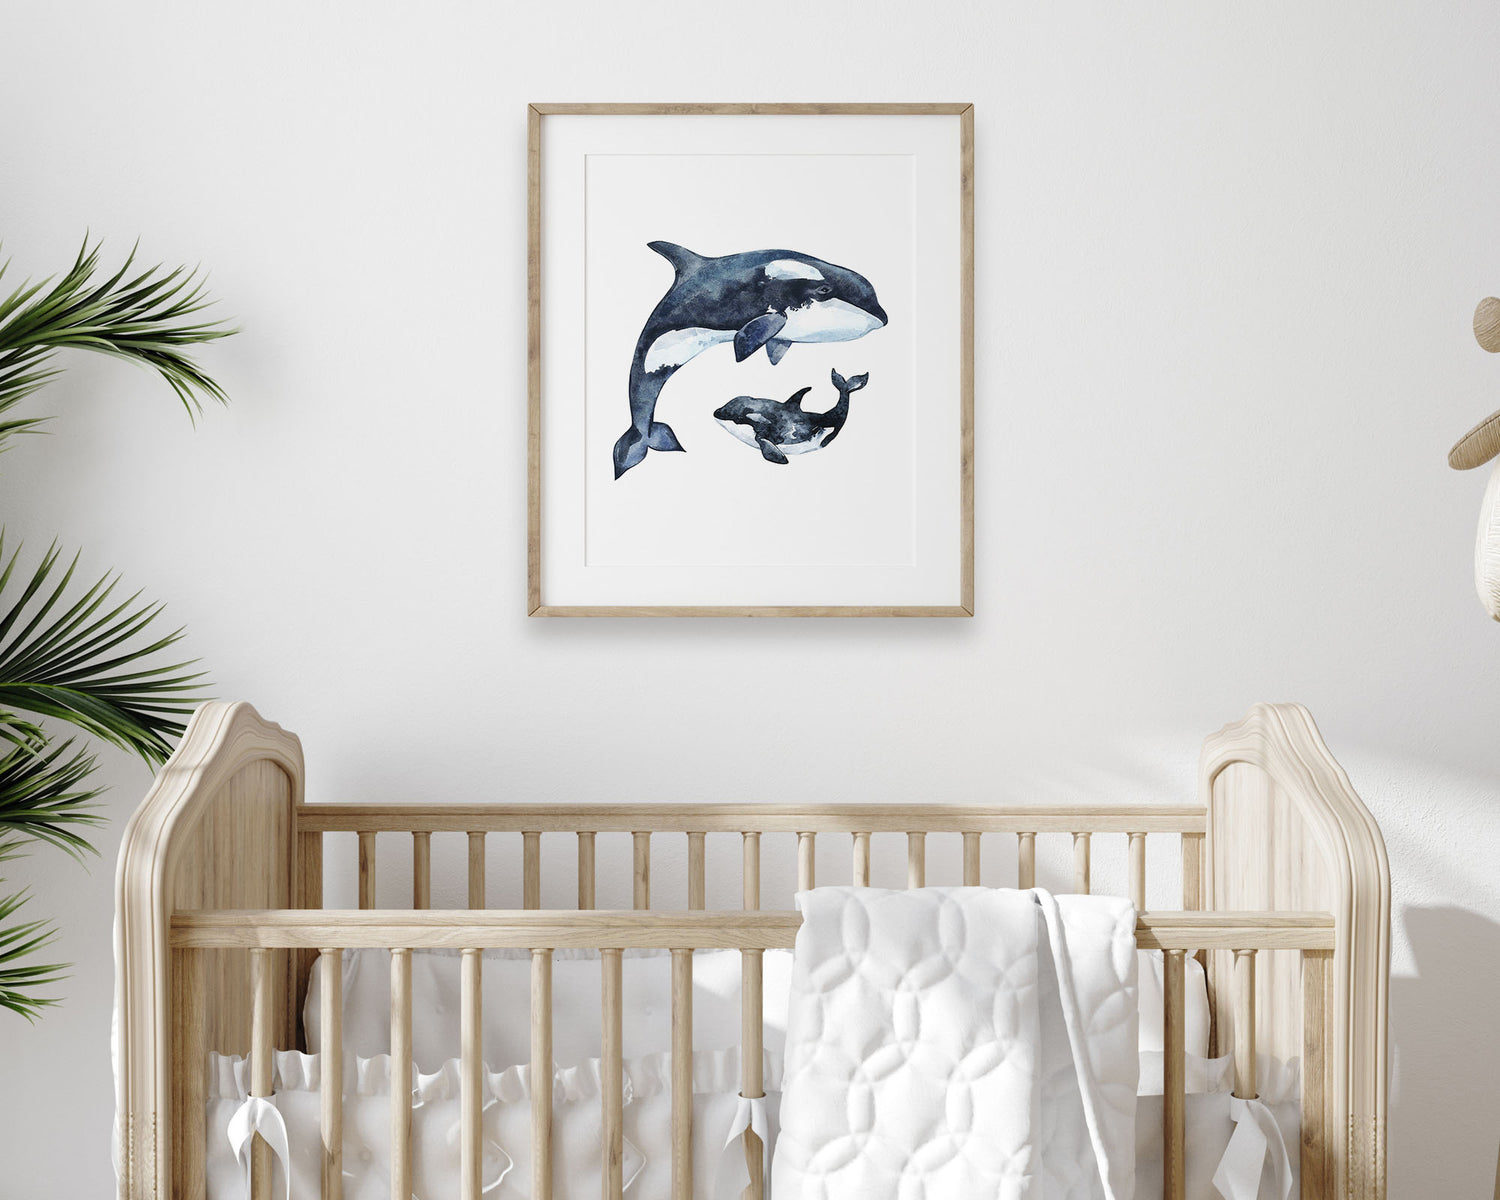 Watercolor Orca Whale Printable Wall Art featuring deep dark navy blue and black watercolor orca whale illustrations. Perfect for Baby Boy Ocean Nursery Decor, Baby Girl Coastal Nursery Wall Art or Nautical Kids Room Decor.